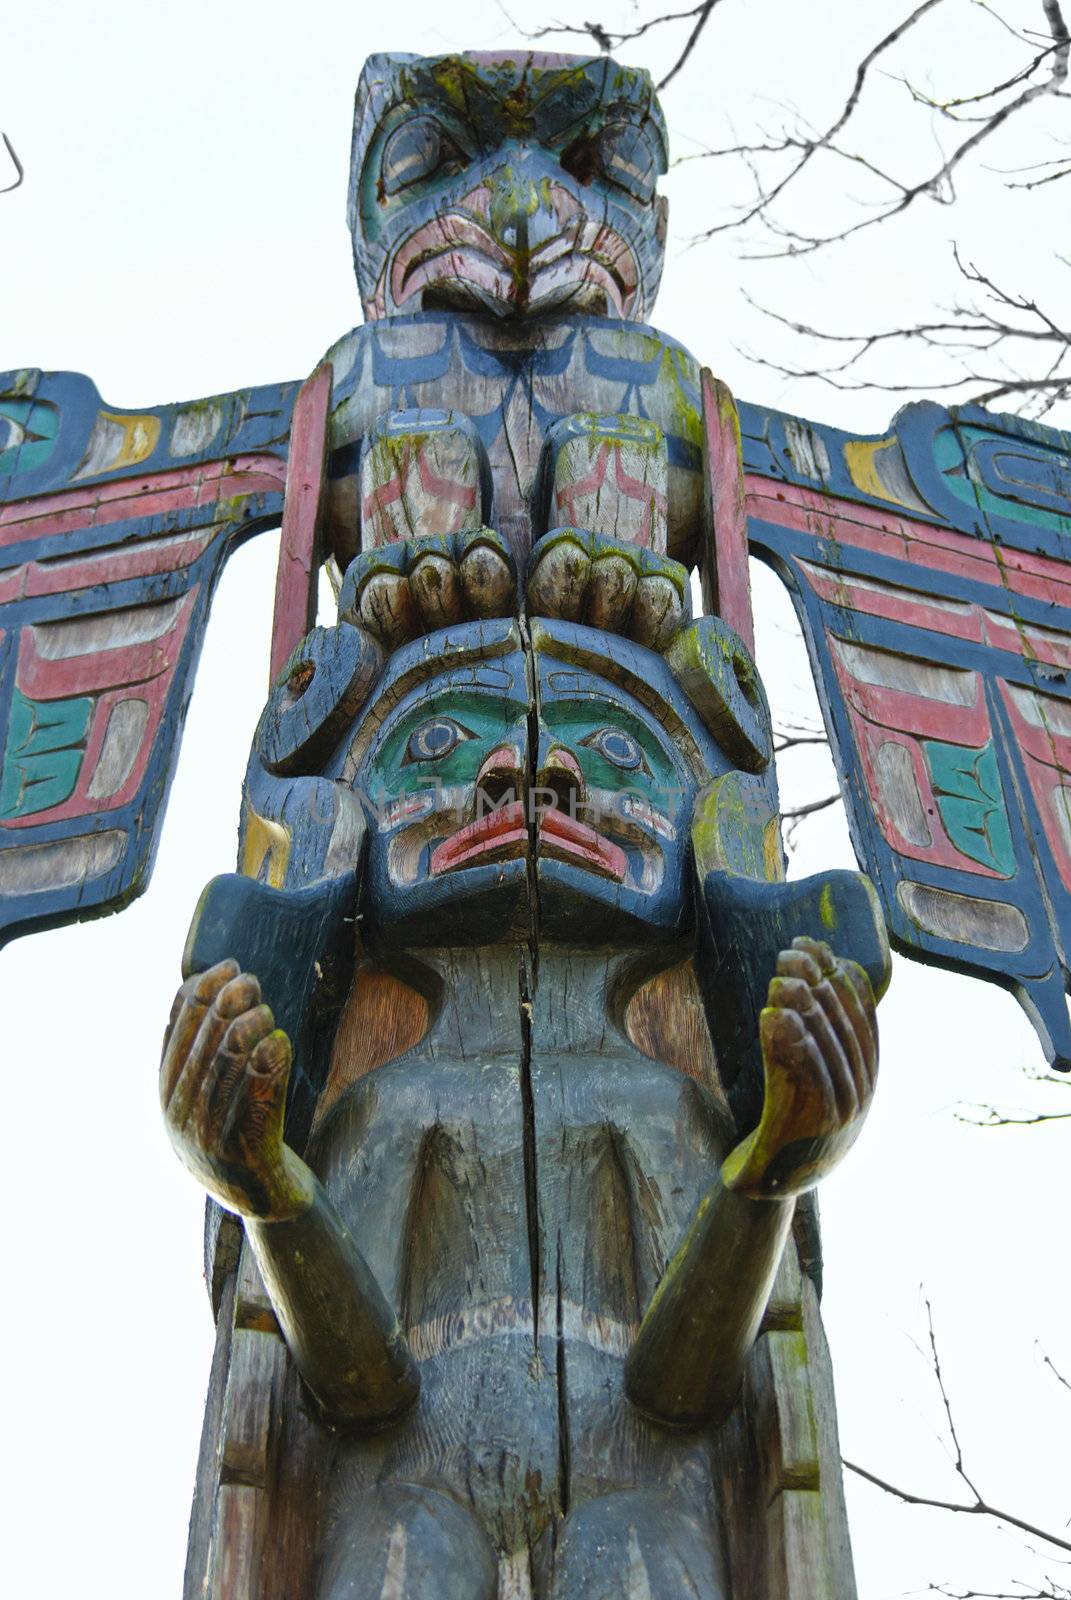 Totem pole outside on zhe background of sky and trees brunches